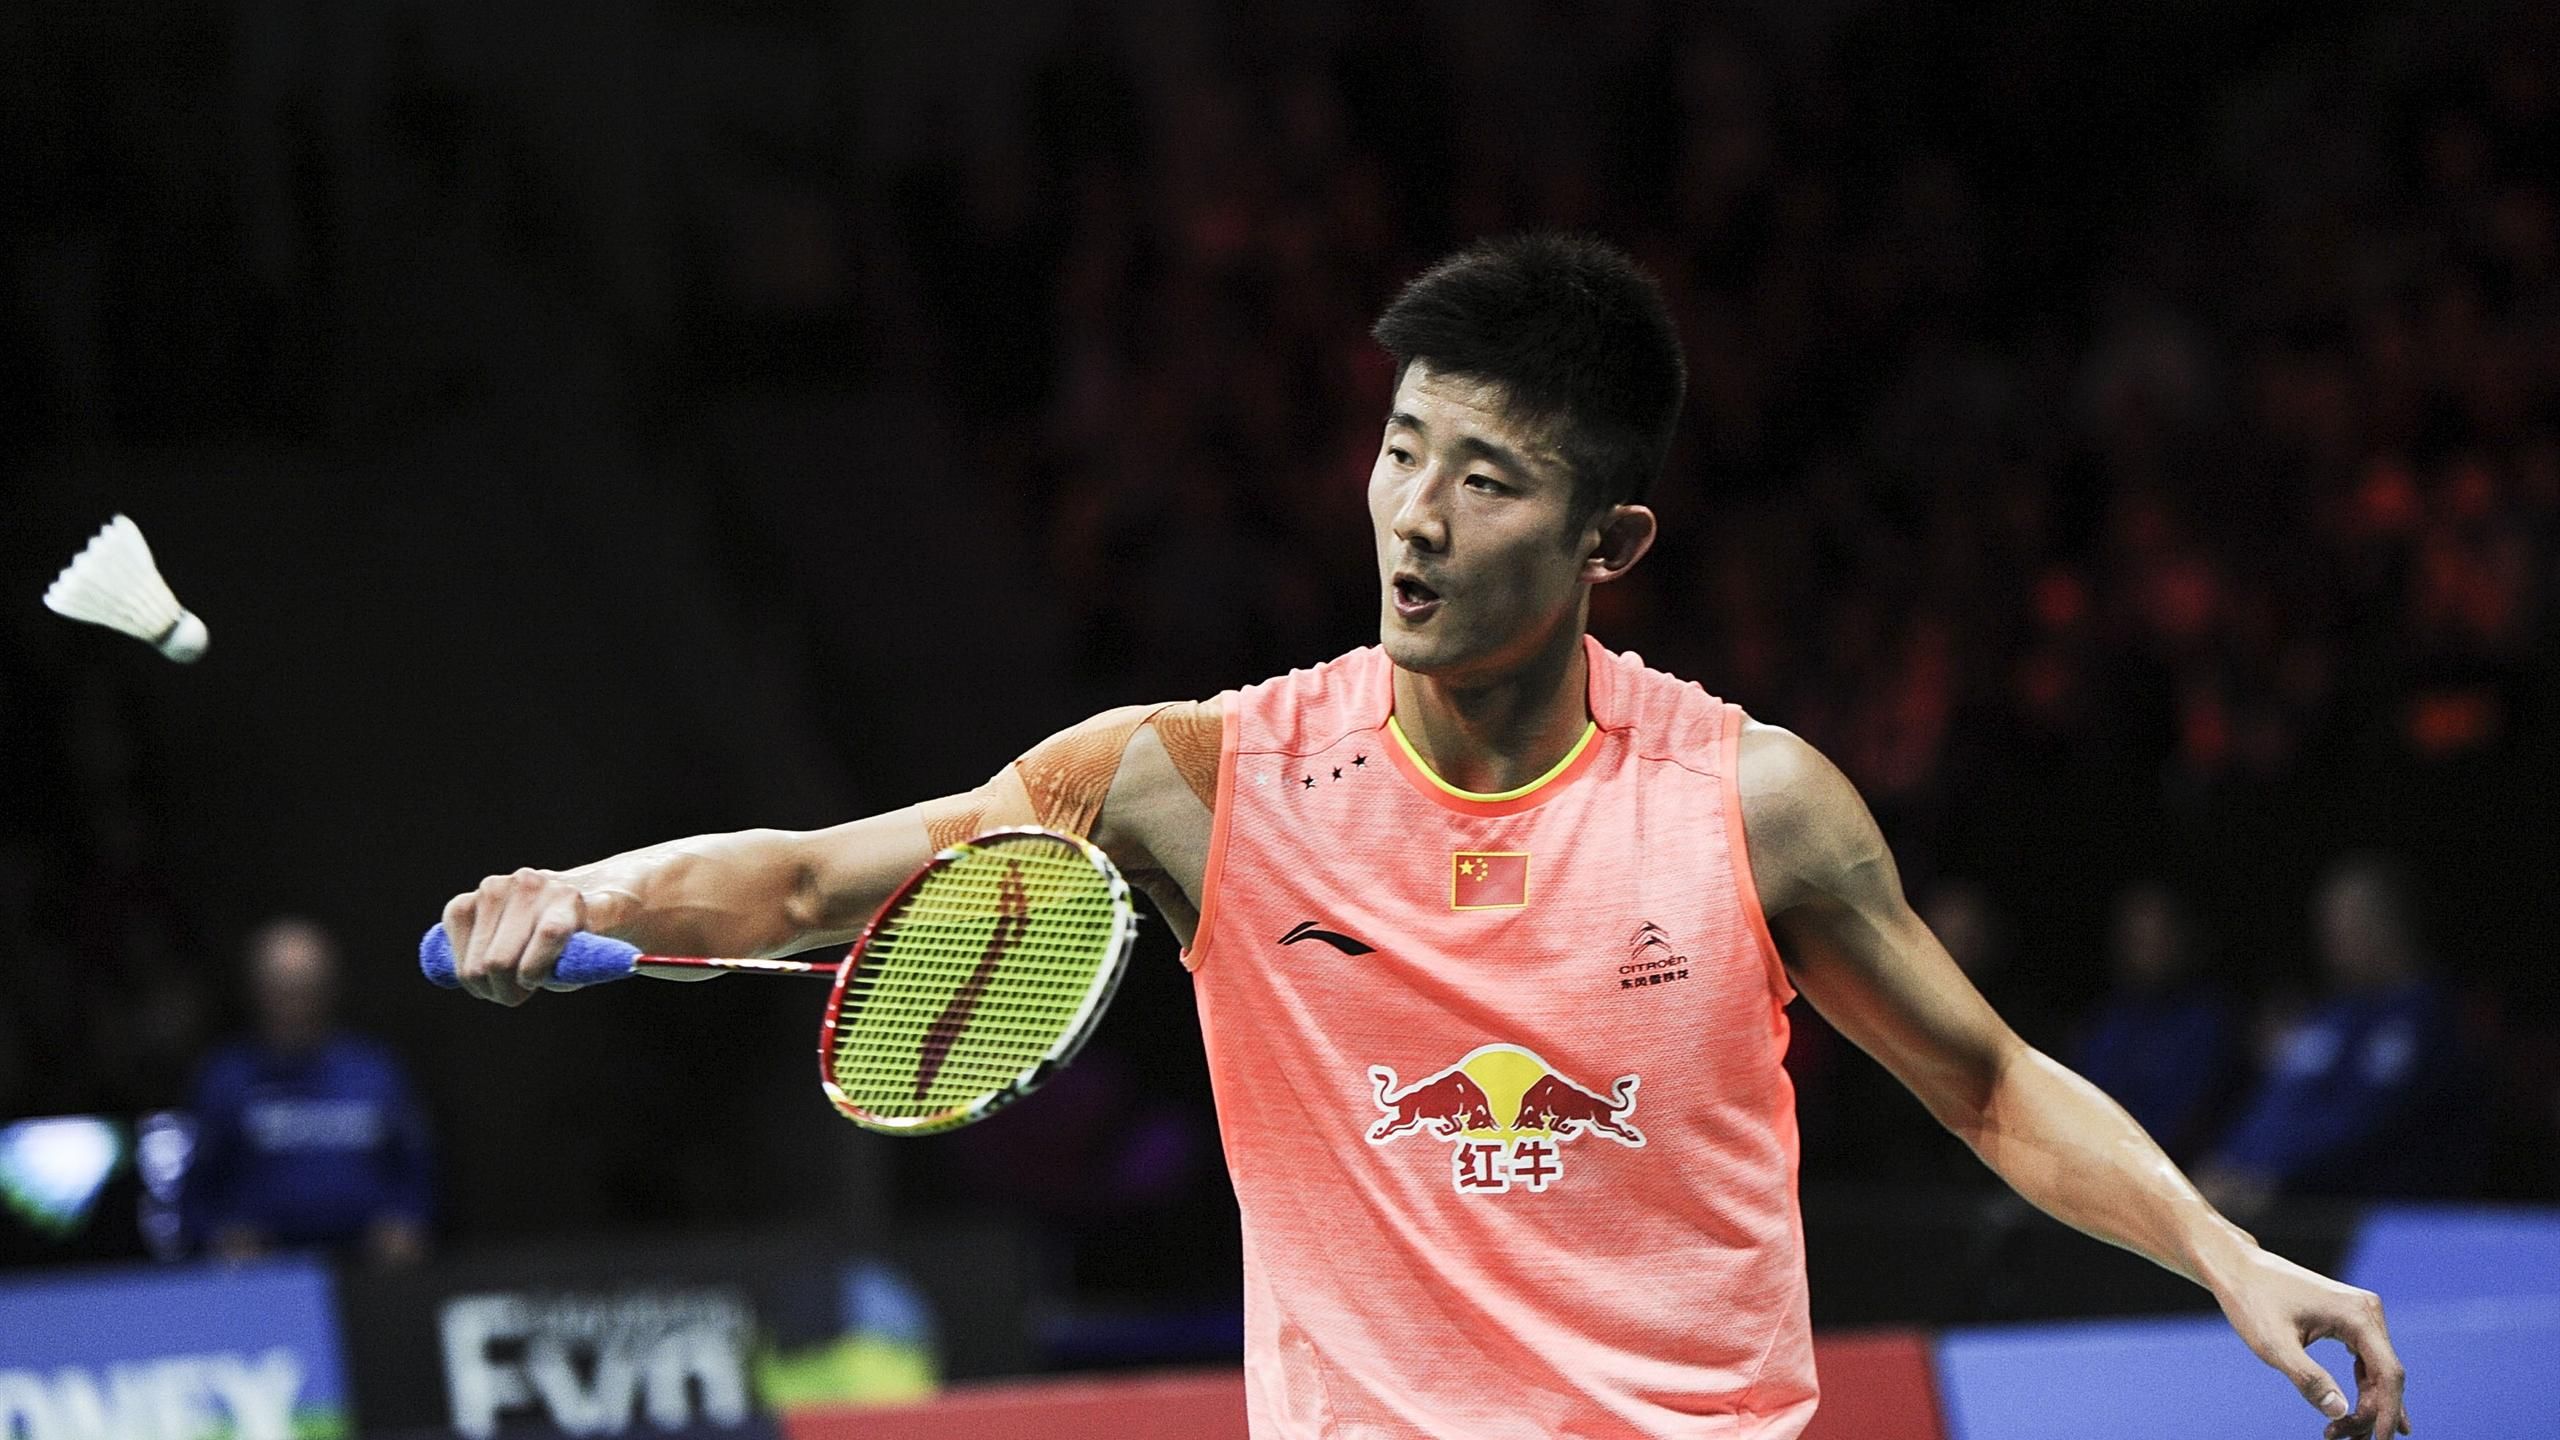 yonex all england open 2022 live telecast channel